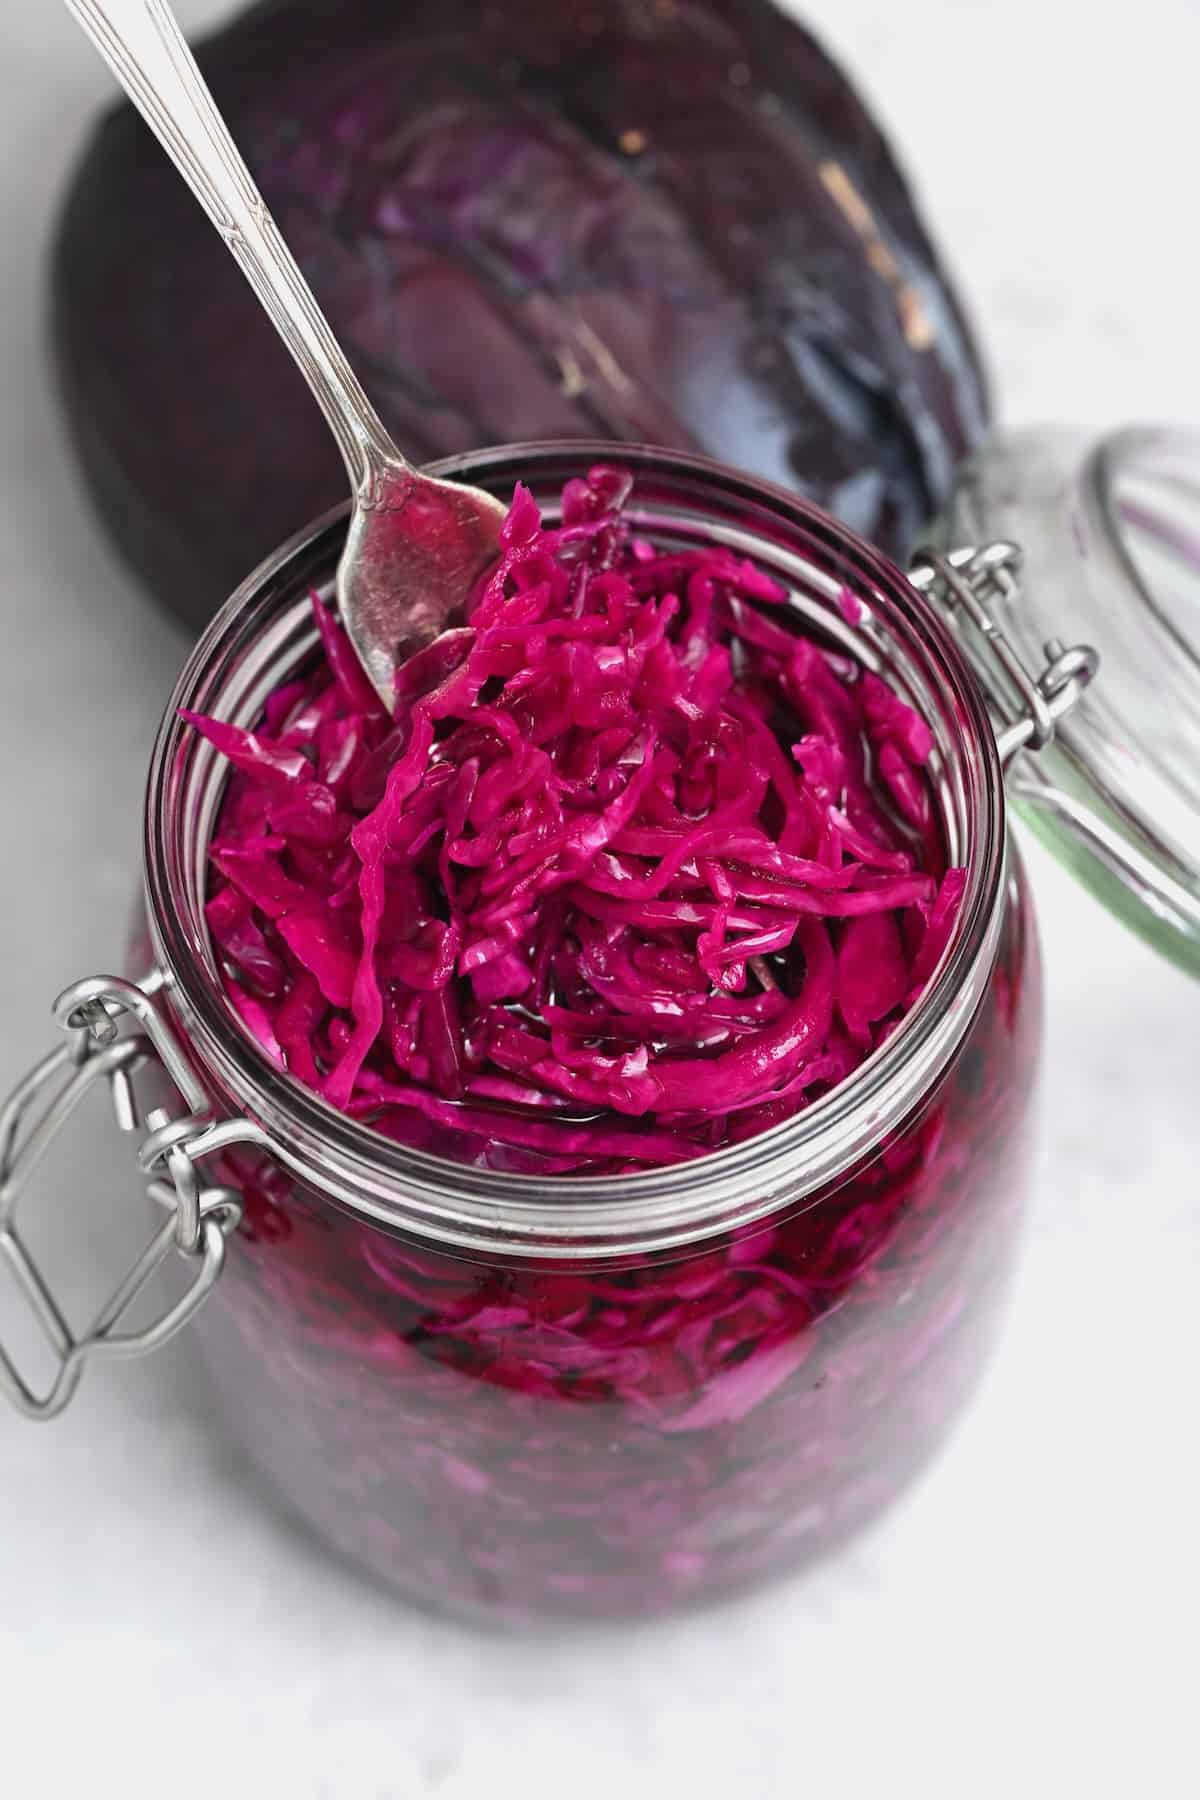 A forkful of pickled red cabbage